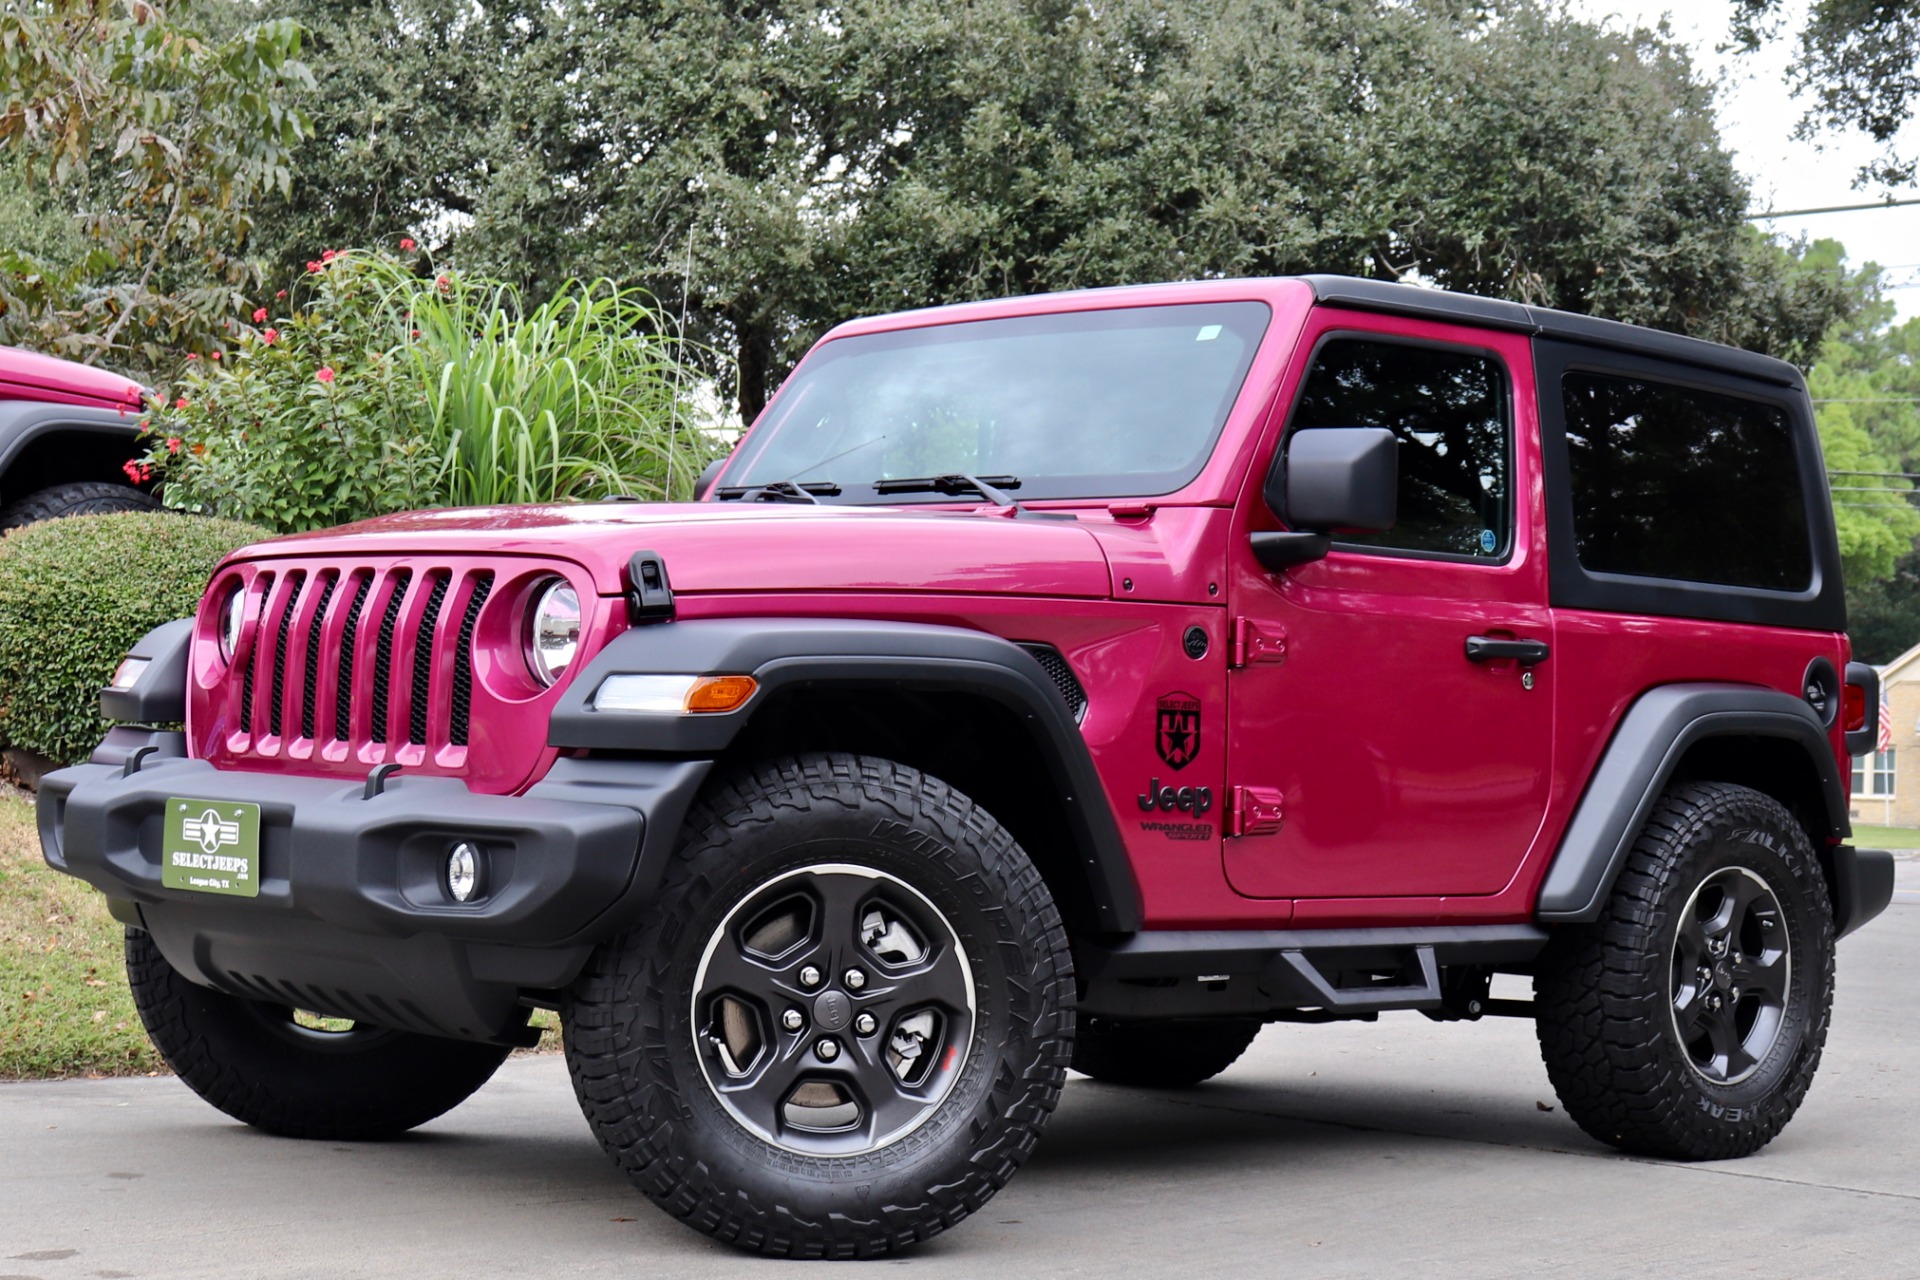 Used 2021 Jeep Wrangler Sport S For Sale ($46,995) | Select Jeeps Inc.  Stock #851373